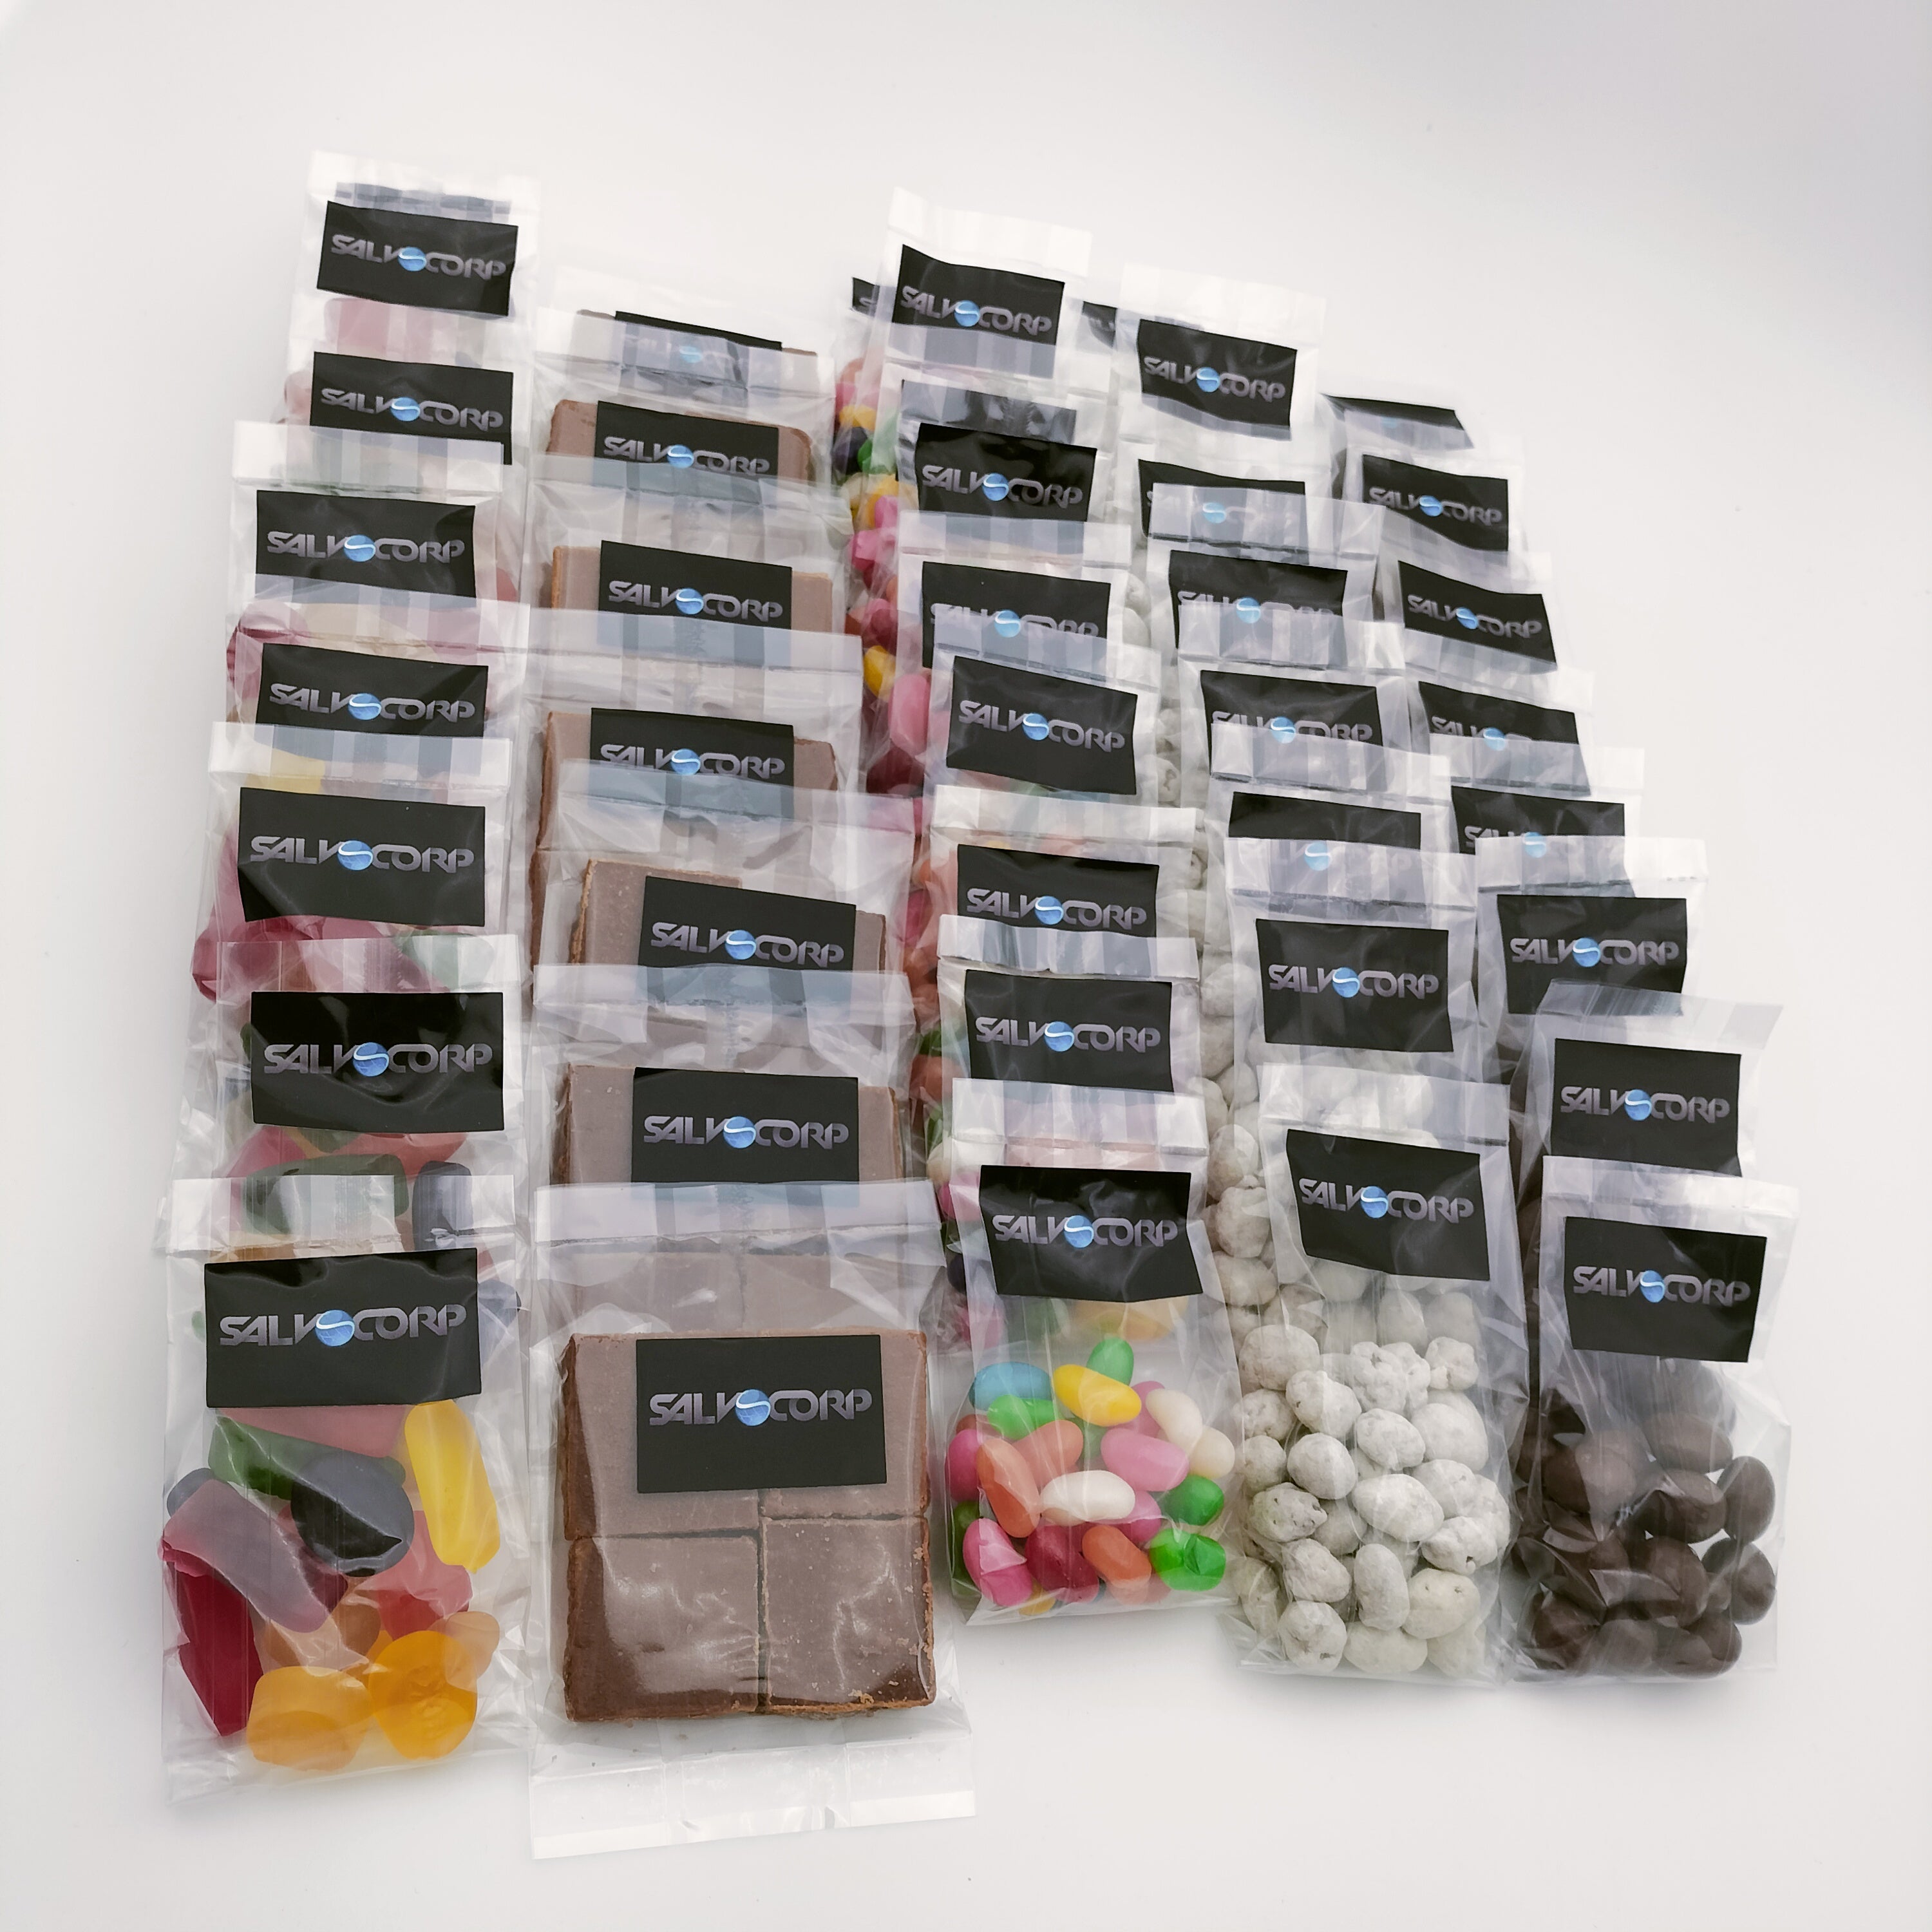 Sweet packets with corporate branding